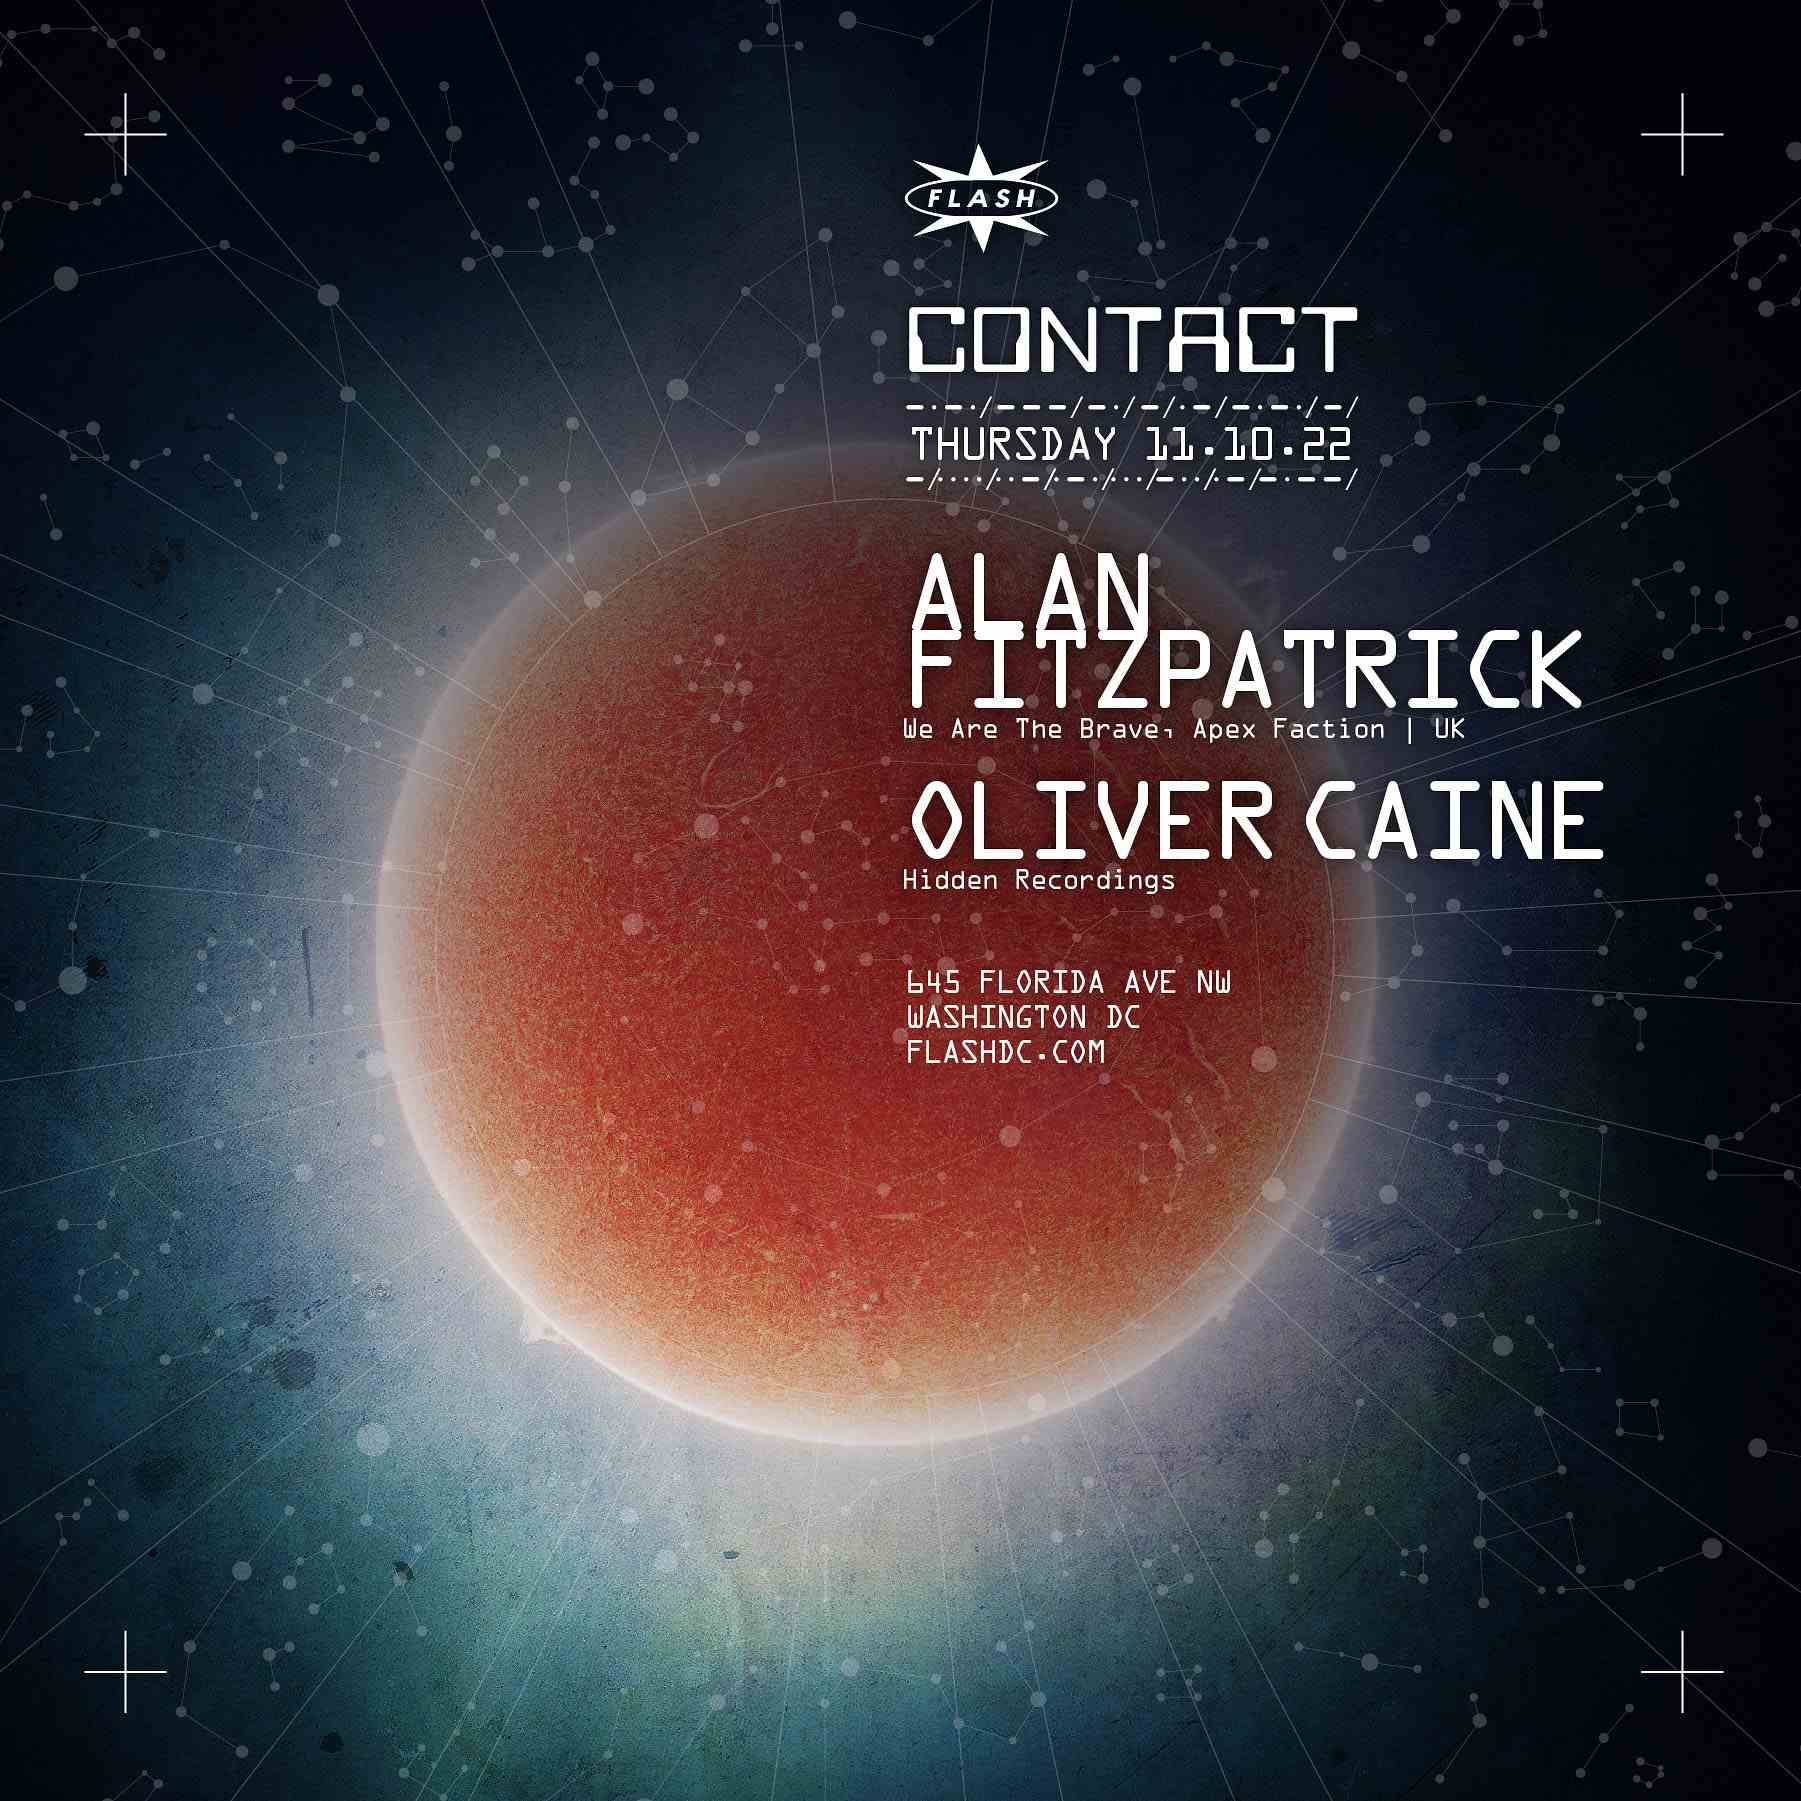 Event image for CONTACT: Alan Fitzpatrick - Oliver Caine